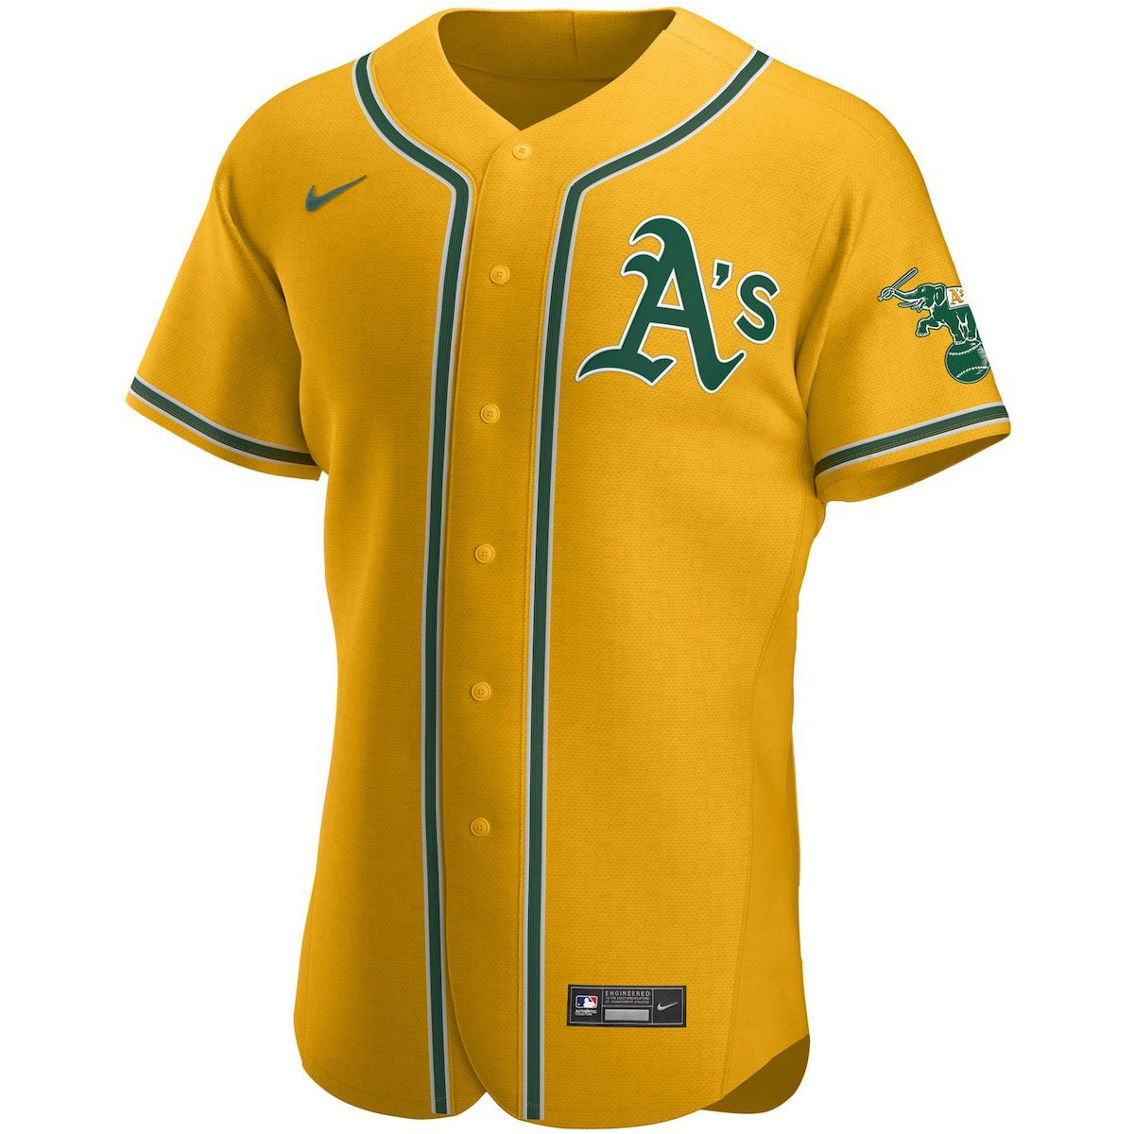 Nike Men's Gold Oakland Athletics Authentic Official Team Jersey - Image 3 of 4